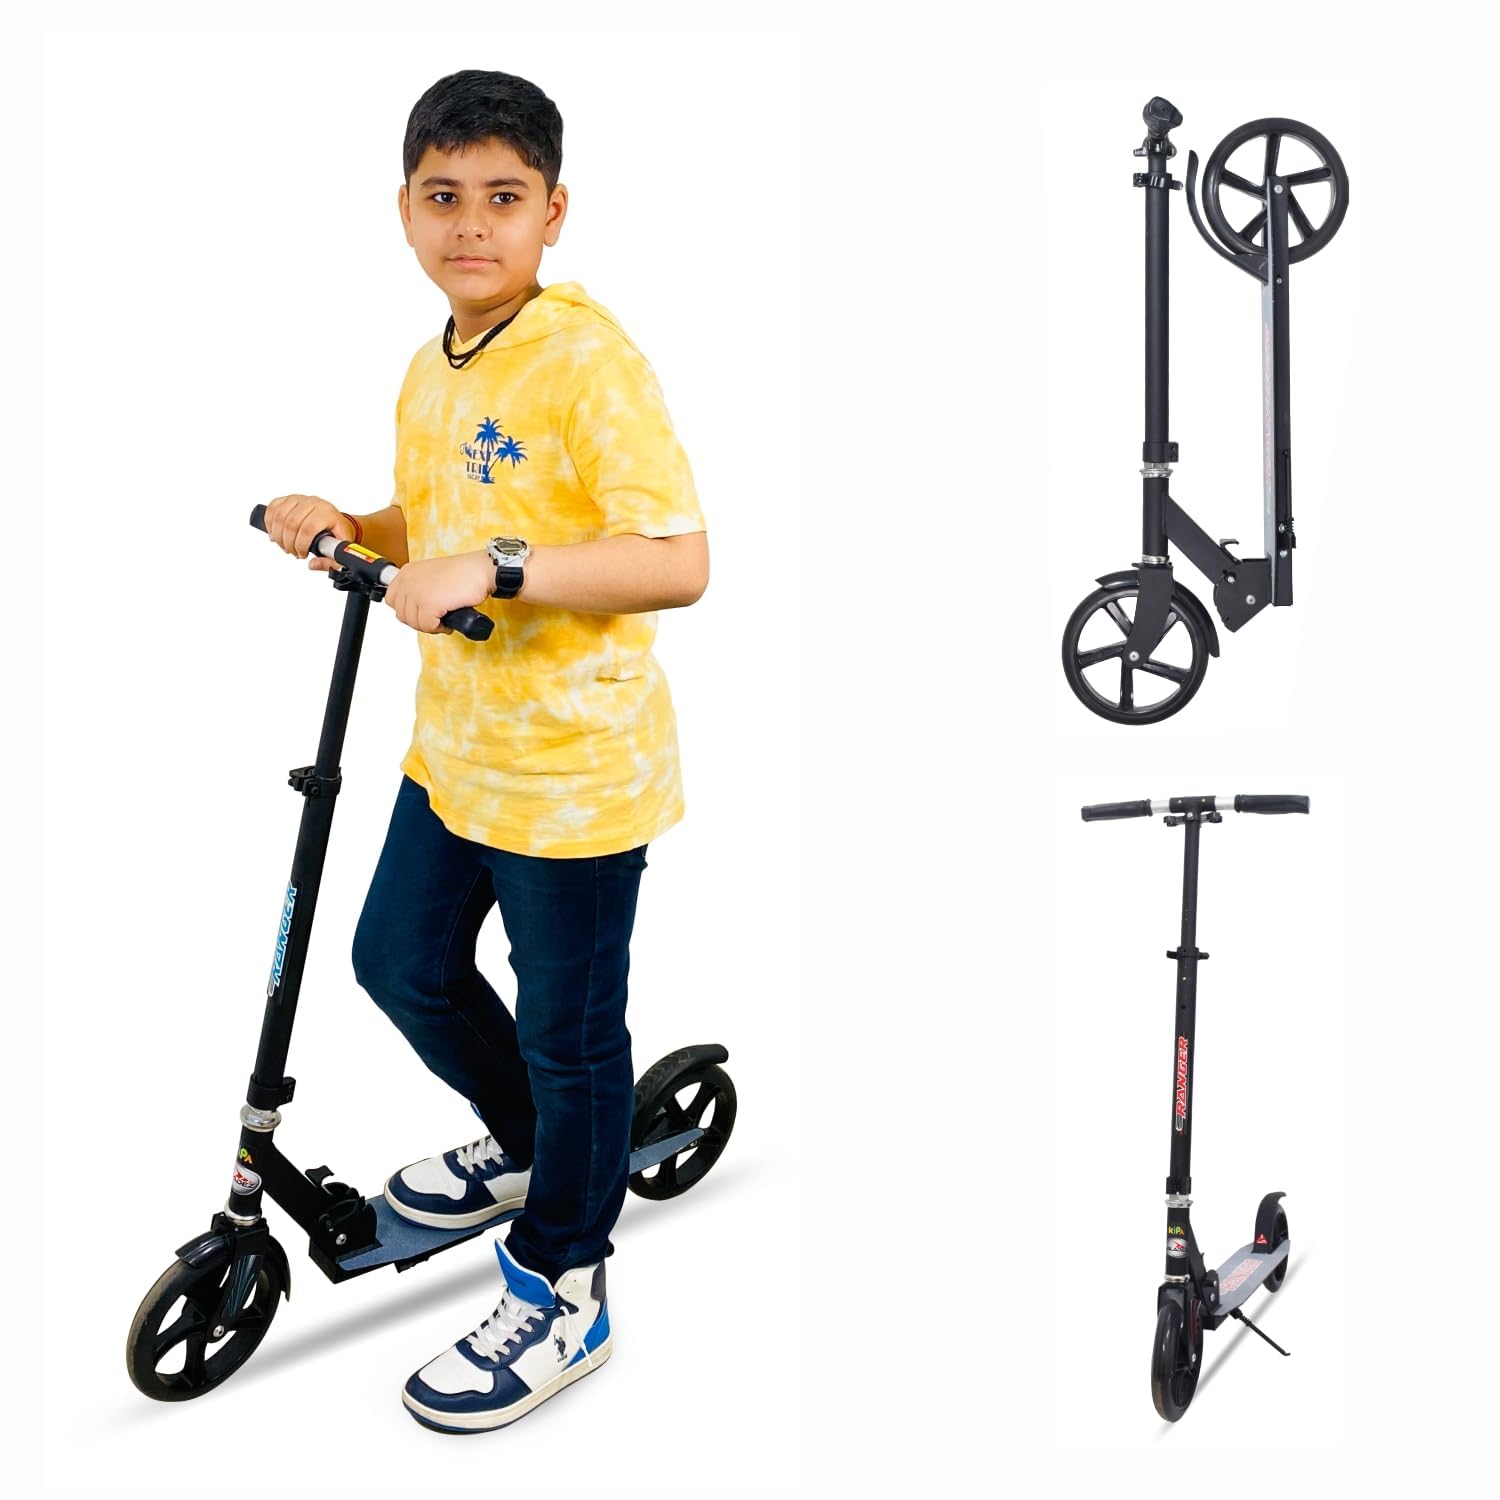 Braintastic Folding Kick Scooter Light Weight Made with Aeronautical Grade Aluminum Alloy with 3 Adjustment Levels Big 200 mm Wheels Scooters with Carry Strap for Kids